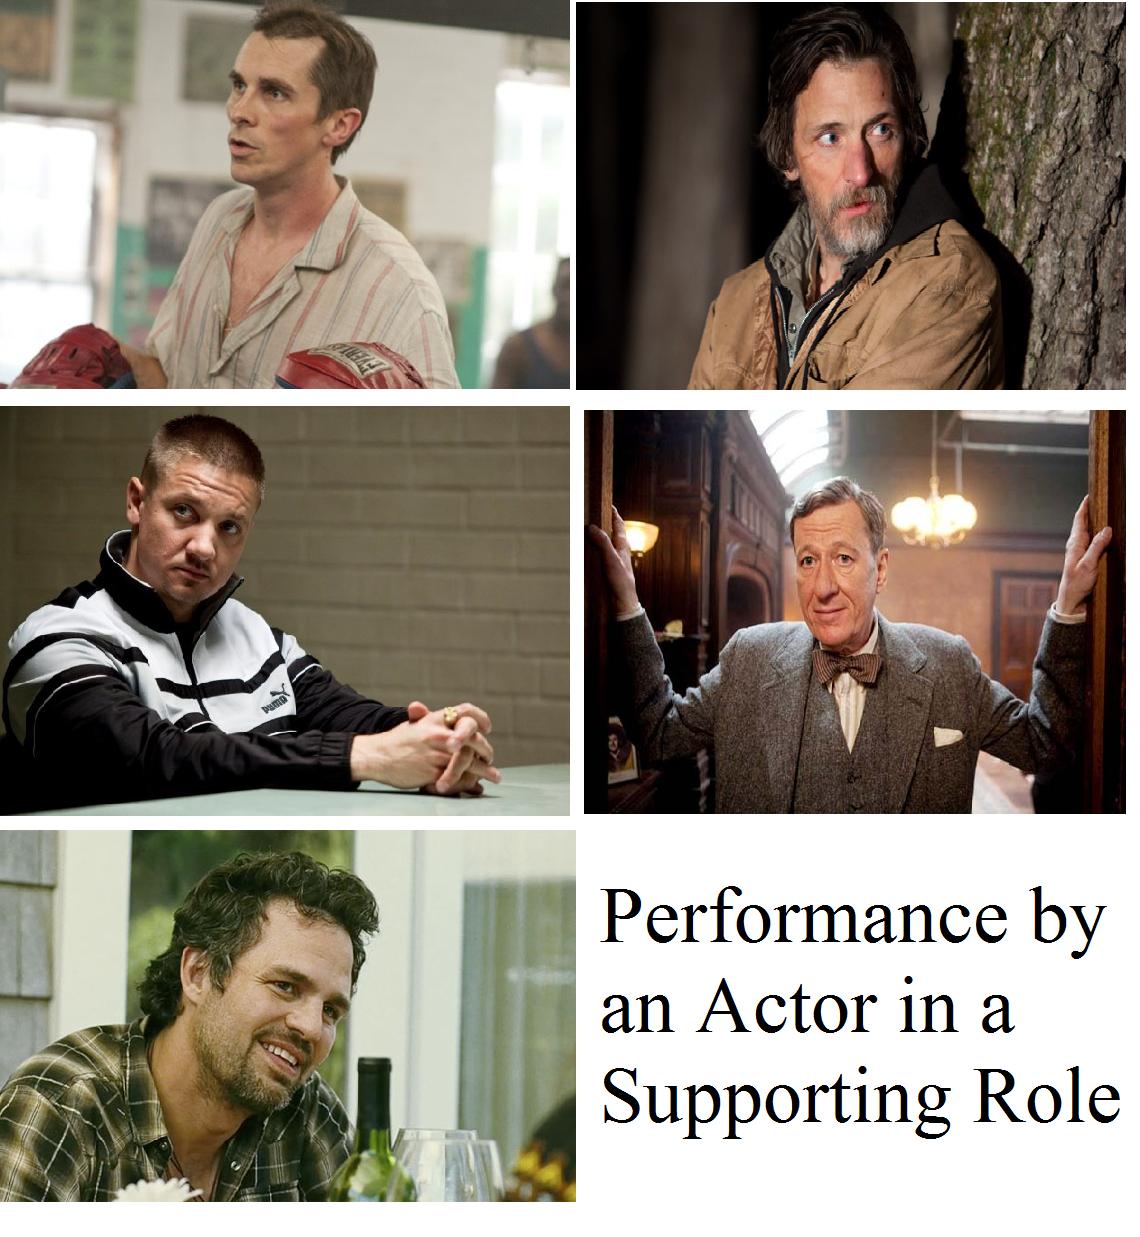 Performance by an Actor in a Supporting Role: